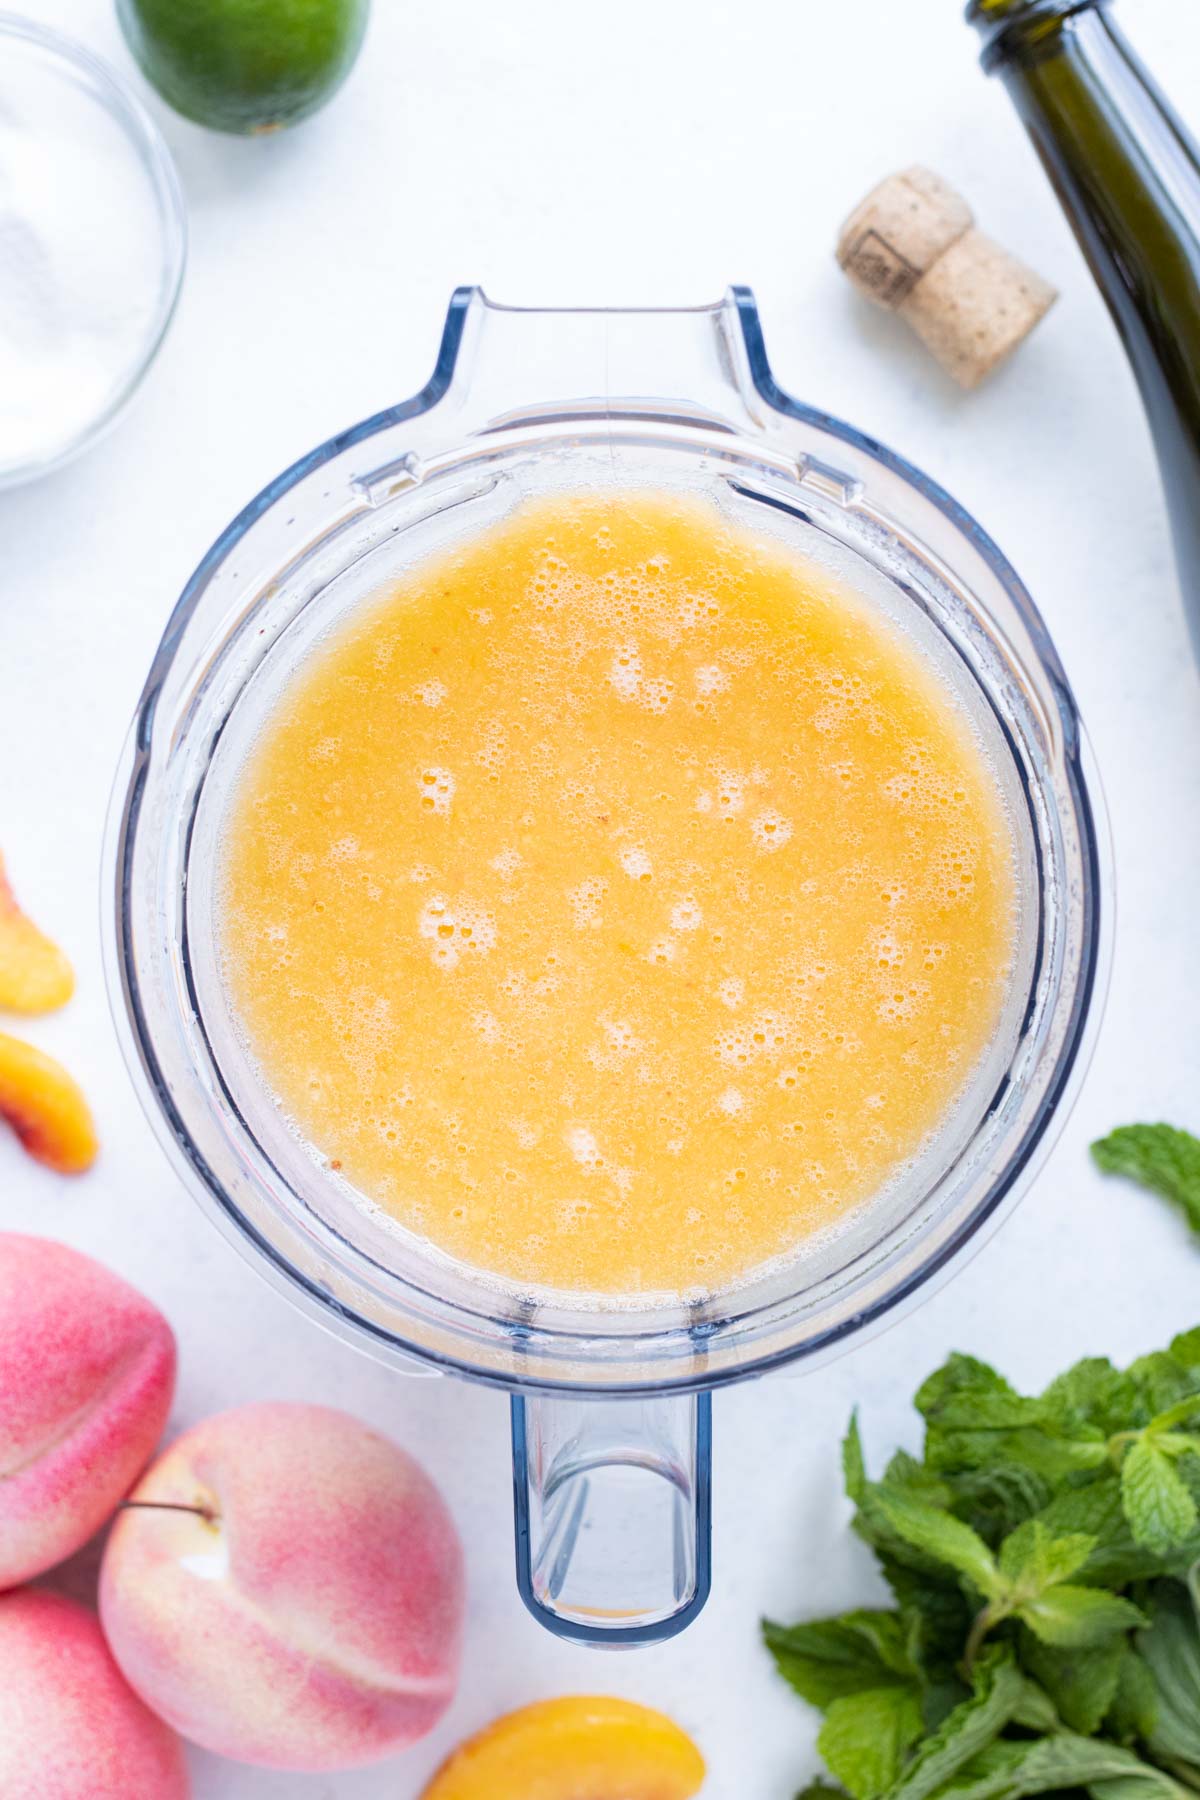 Blend peaches and Prosecco in a blender.